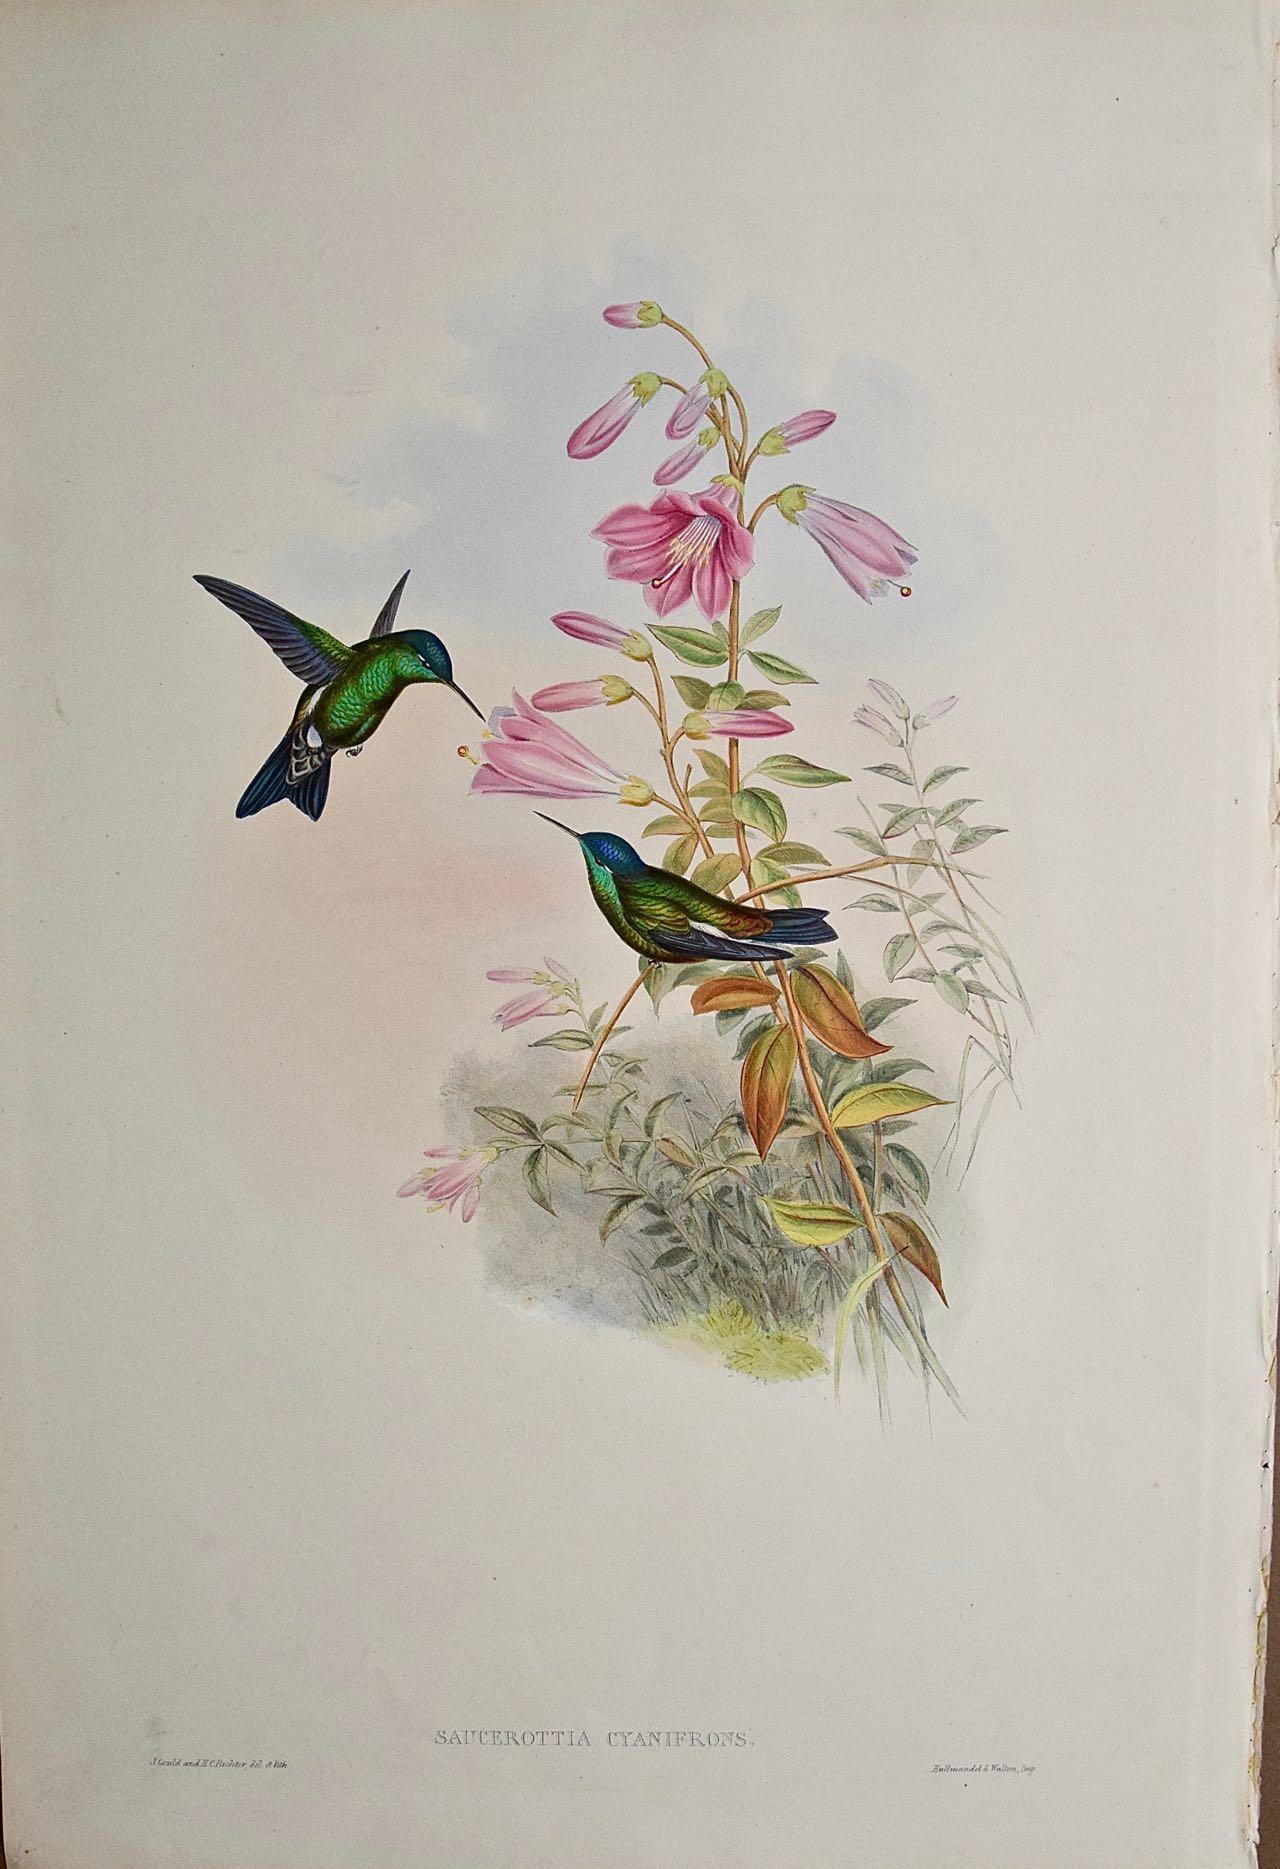 John Gould and Henry Constantine Richter Landscape Print - Hummingbirds: 19th C. Gould Hand-colored "Cyanifrons", Blue-capped Saucerottia 